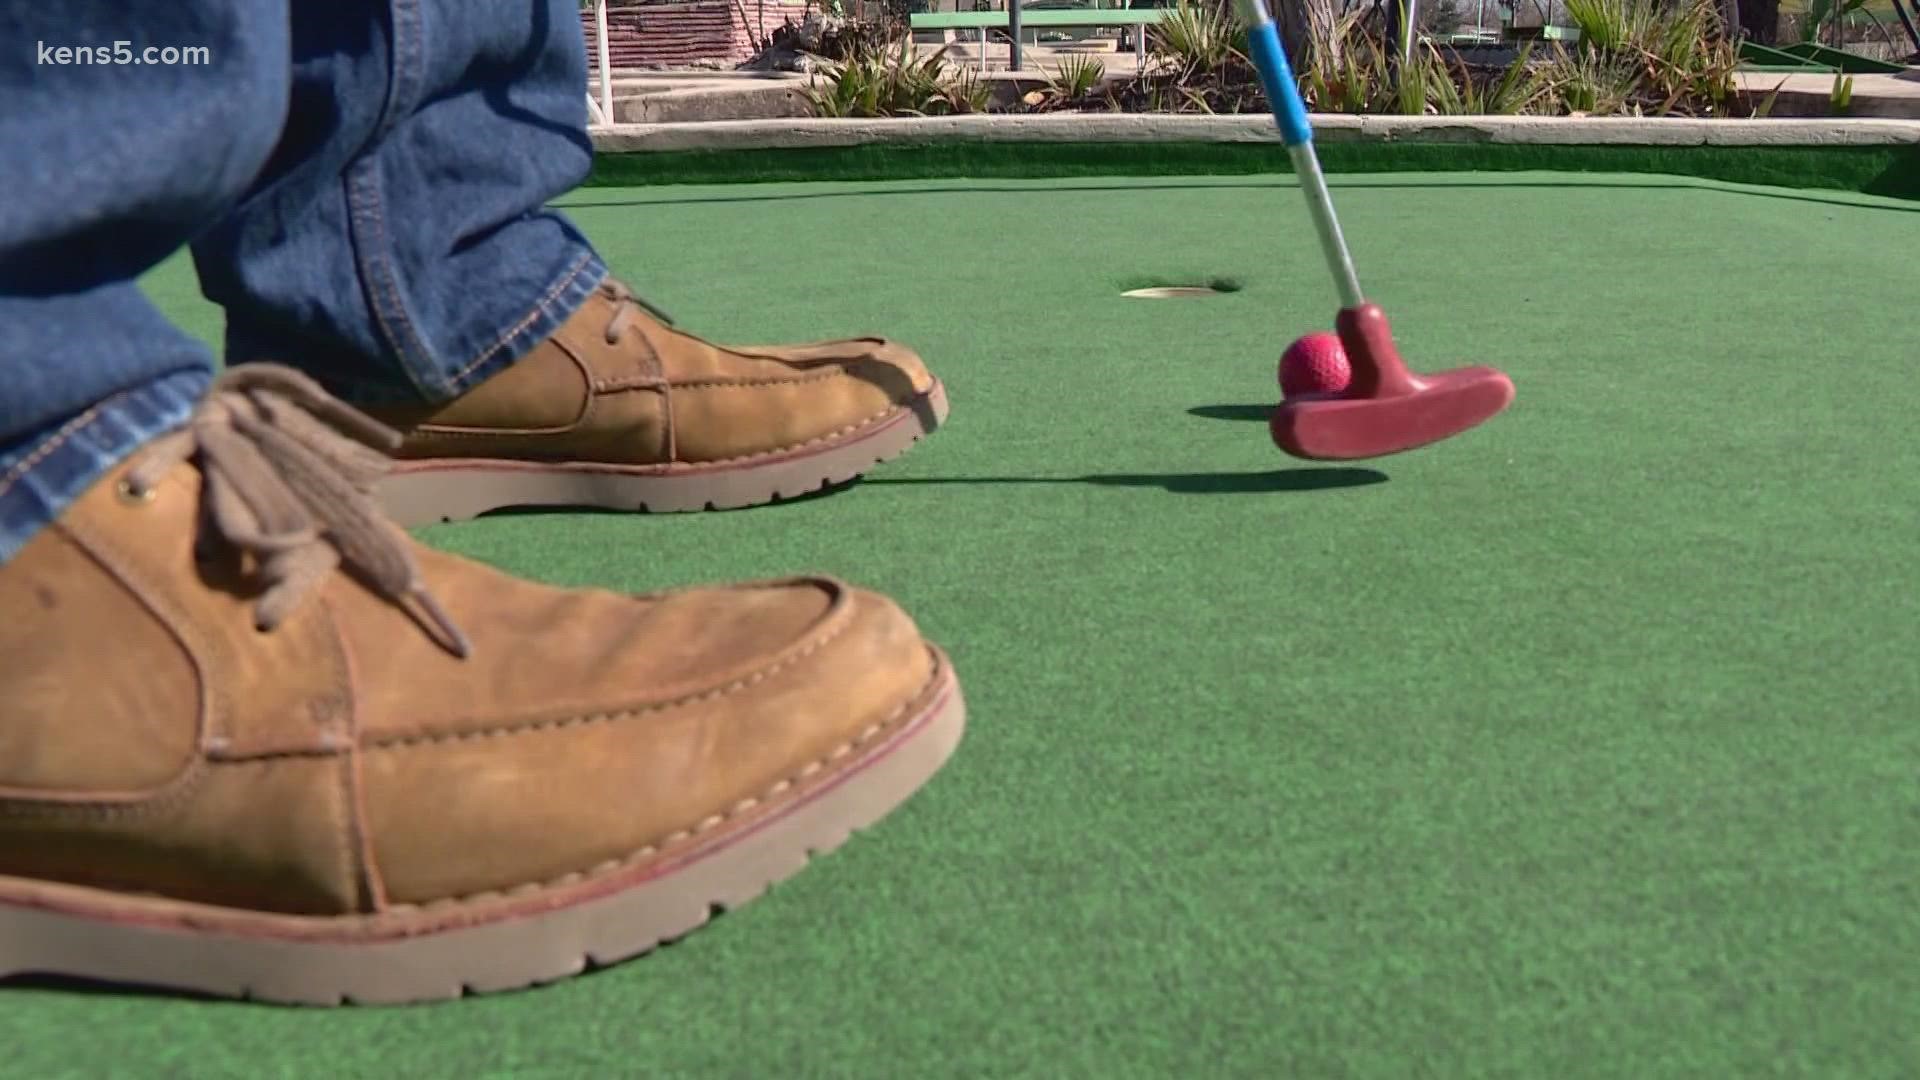 It's believed to be the oldest mini golf course in the country, but some San Antonians don't even know it exists.